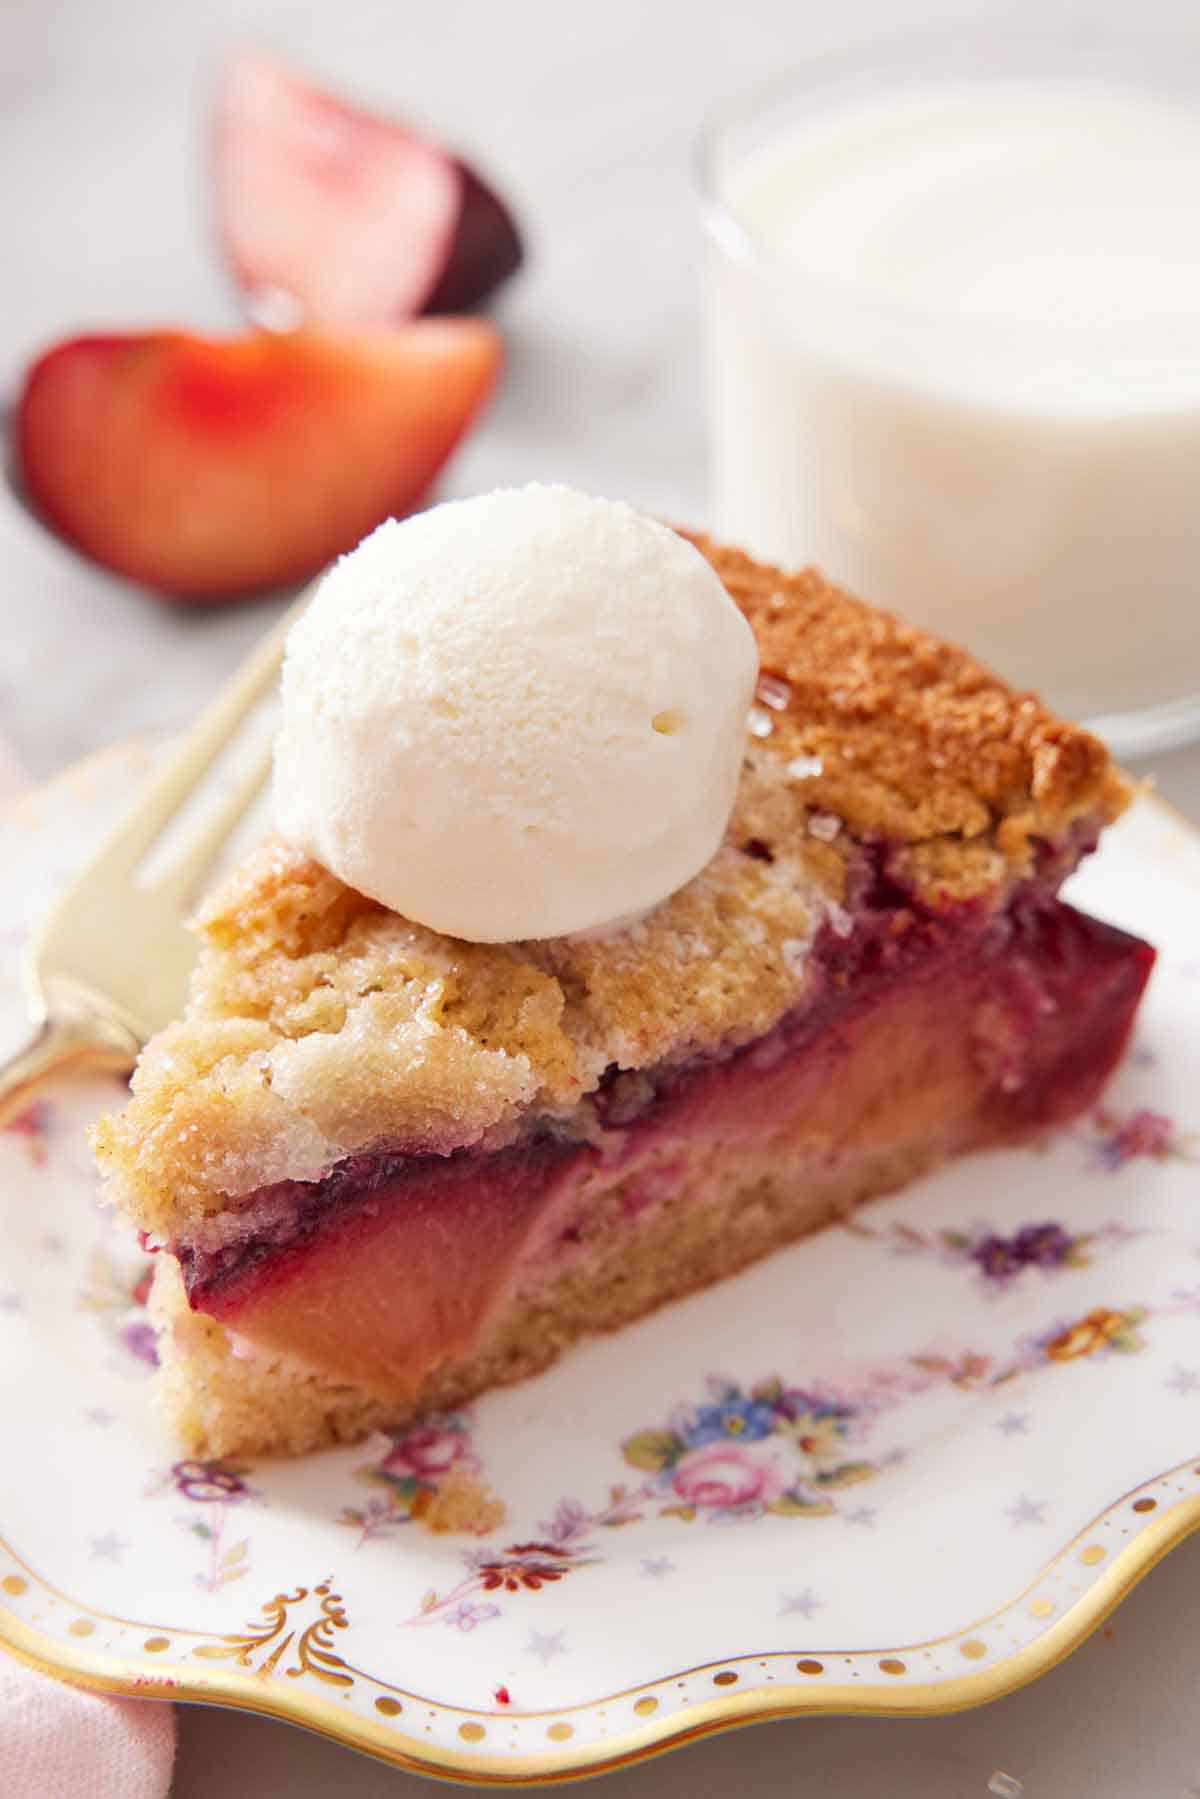 A plate with a slice of plum cake topped with a scoop of ice cream.